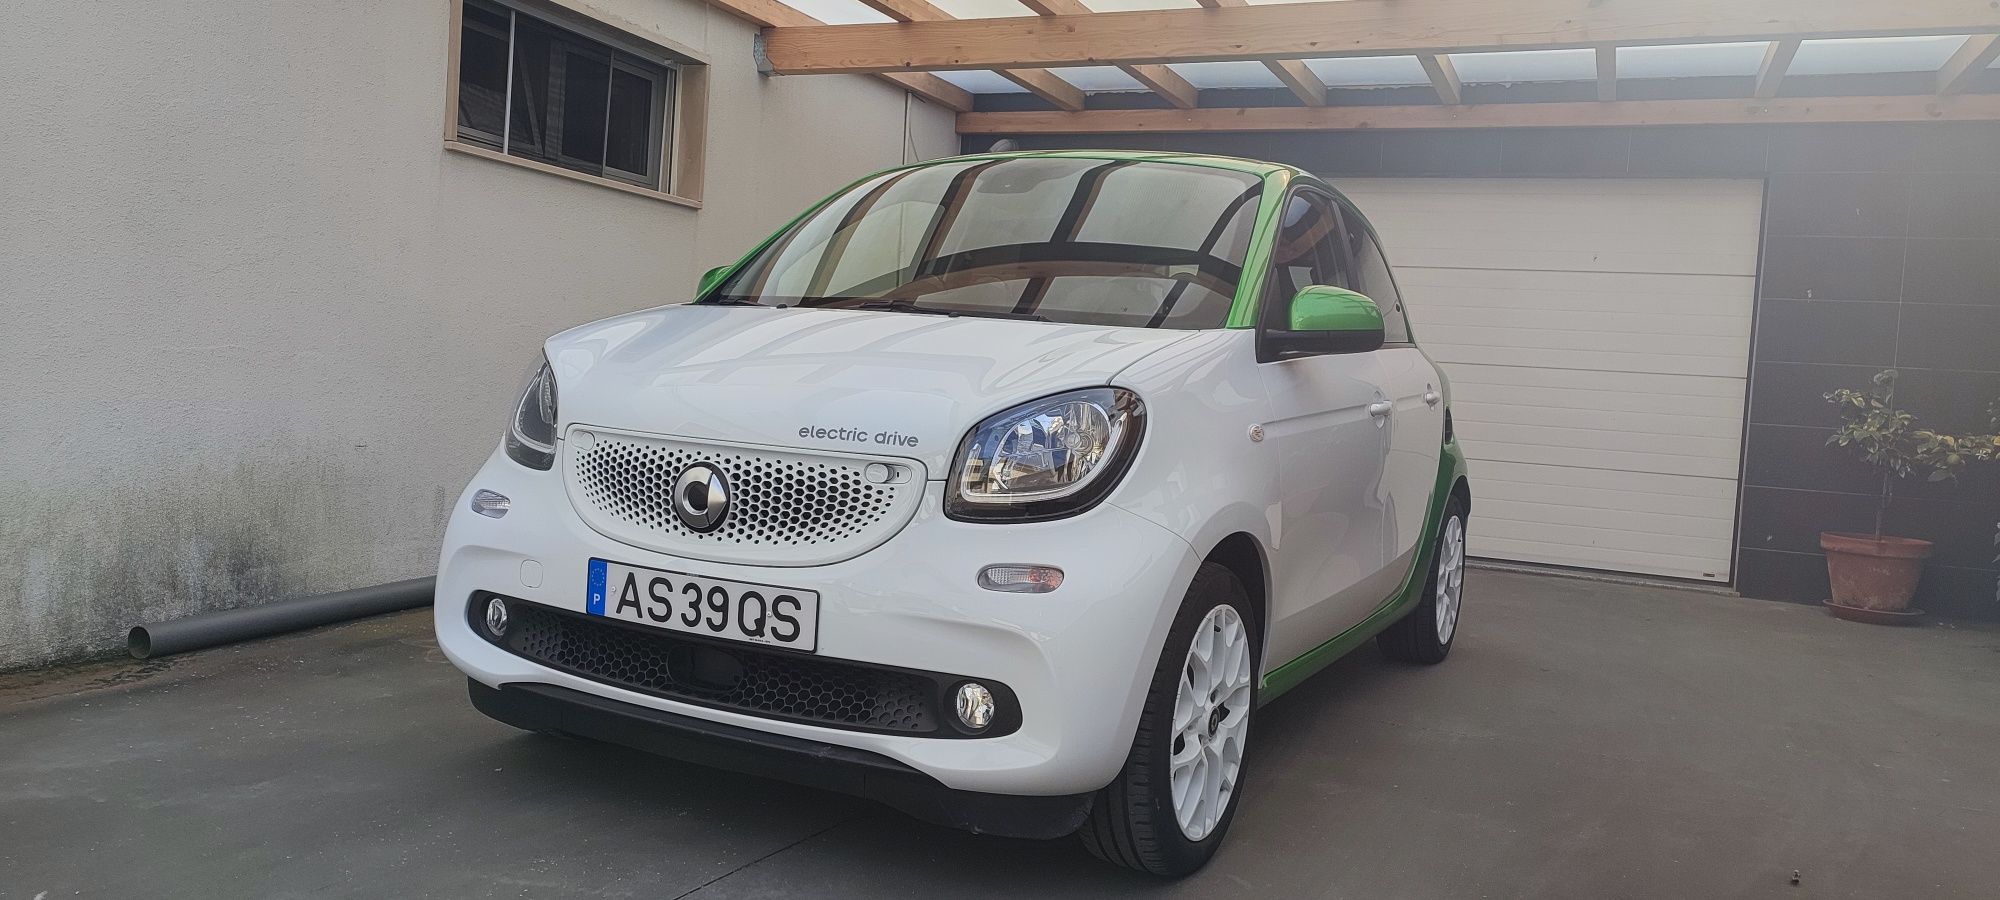 Smart fourfour electric drive